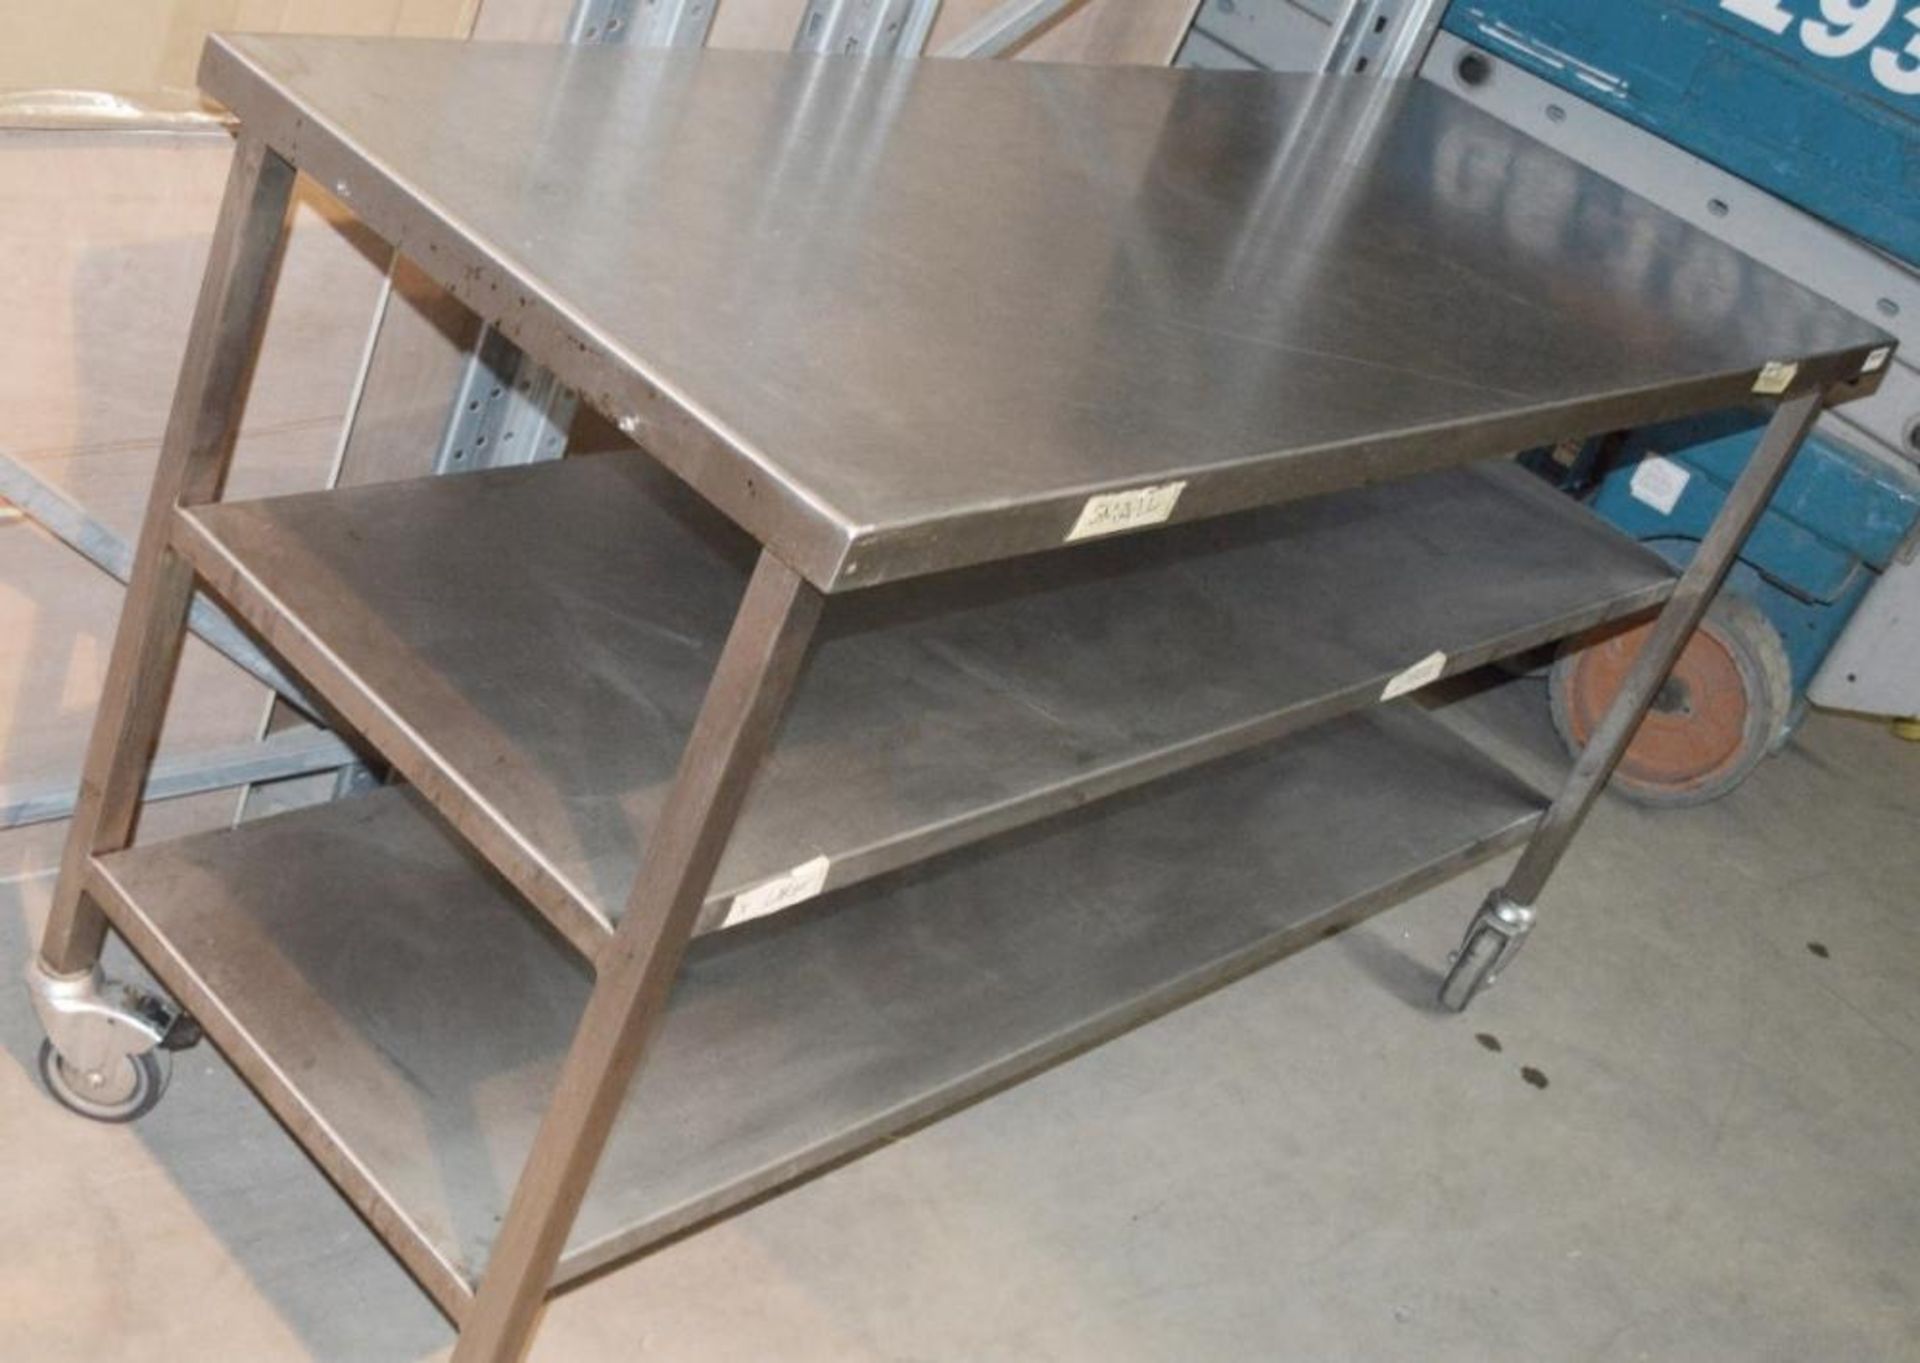 1 x Stainless Steel Commercial Kitchen Prep Table With Undershelves On Castors - Dimensions: W160 x - Image 2 of 3